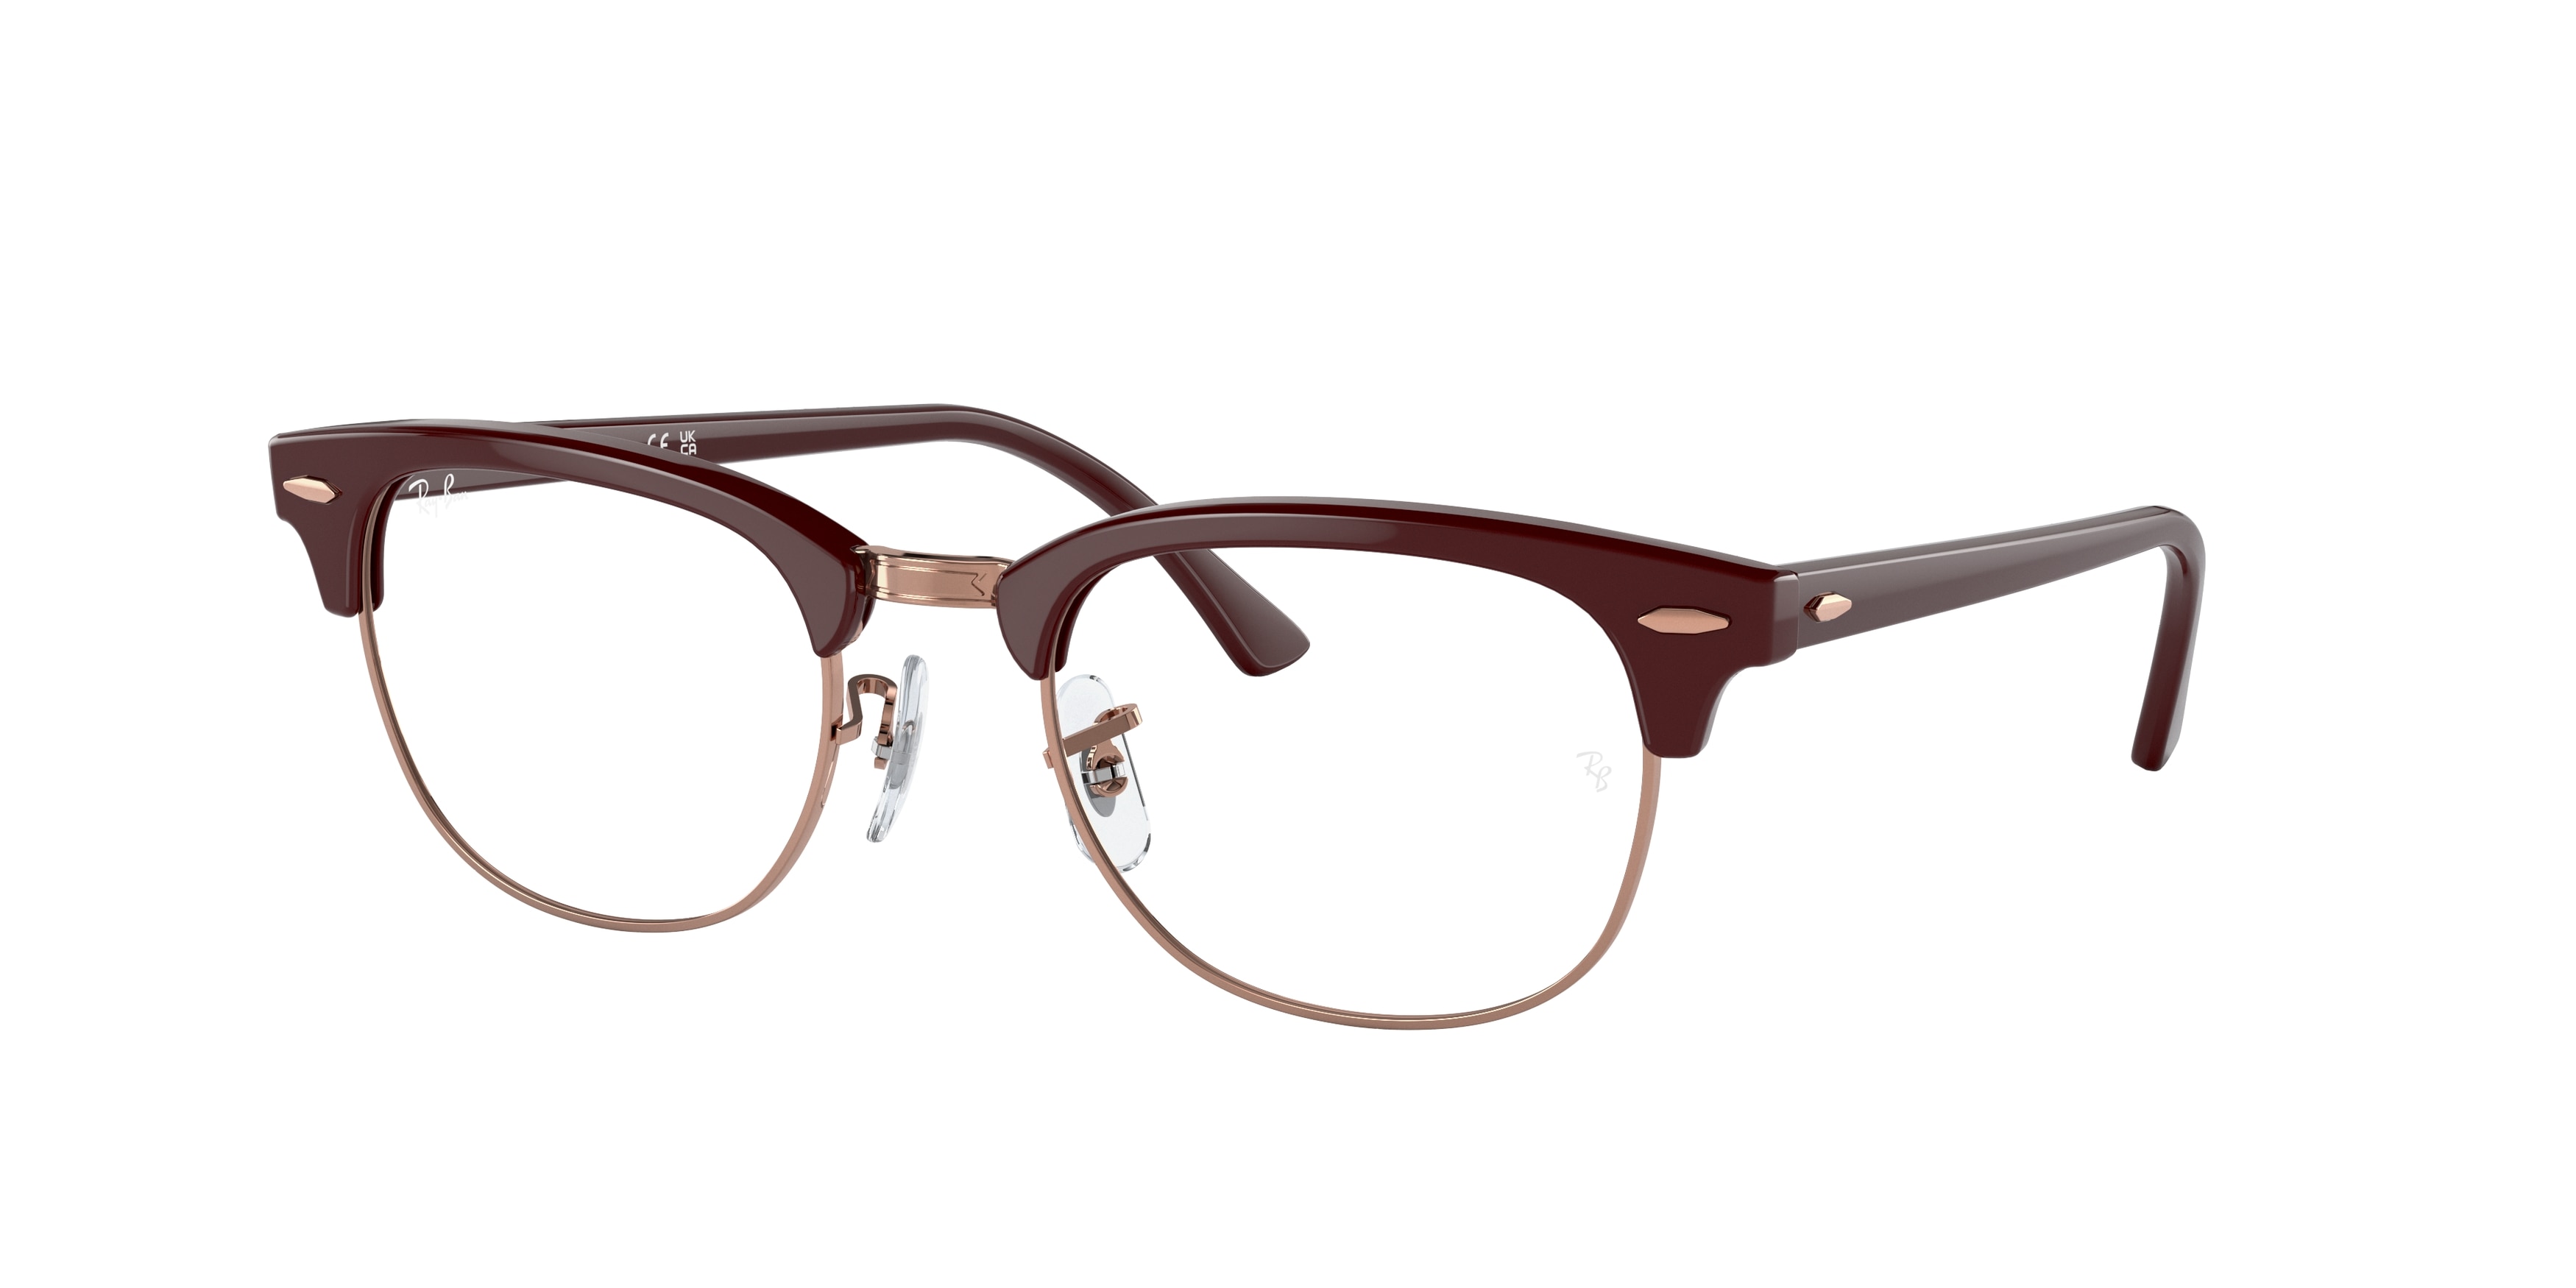 Ray-ban Clubmaster RX5154 - Cunningham Optical One